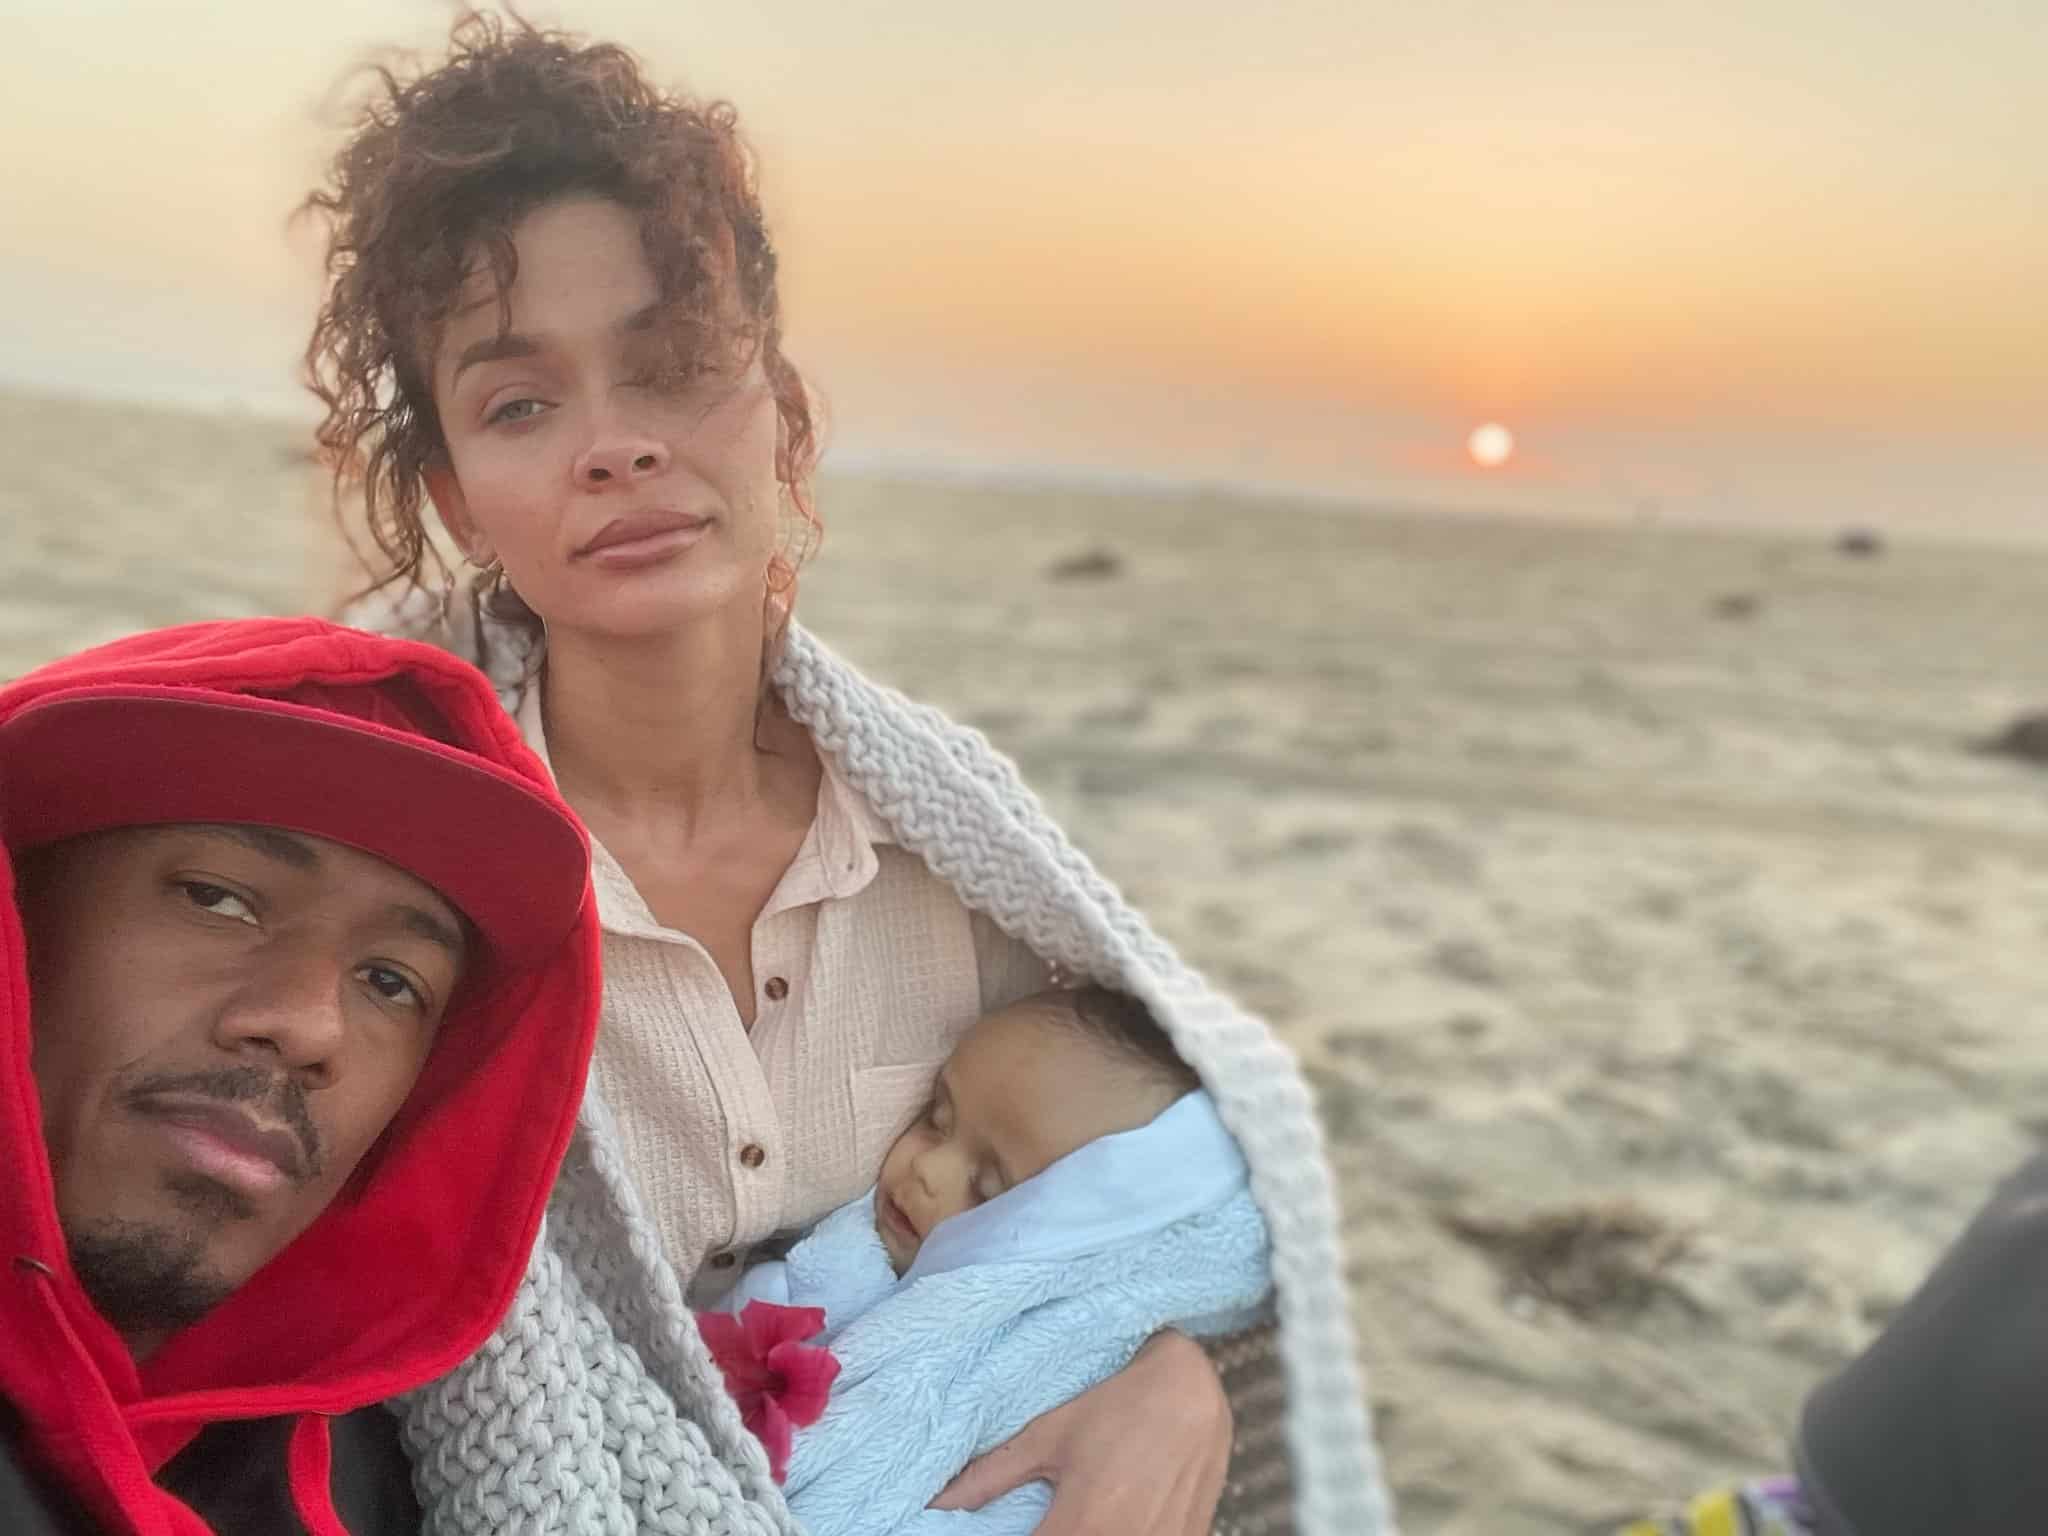 Nick Cannon shares that his 5-month-old son, Zen Cannon, passed away over the weekend after battling a form of brain cancer.